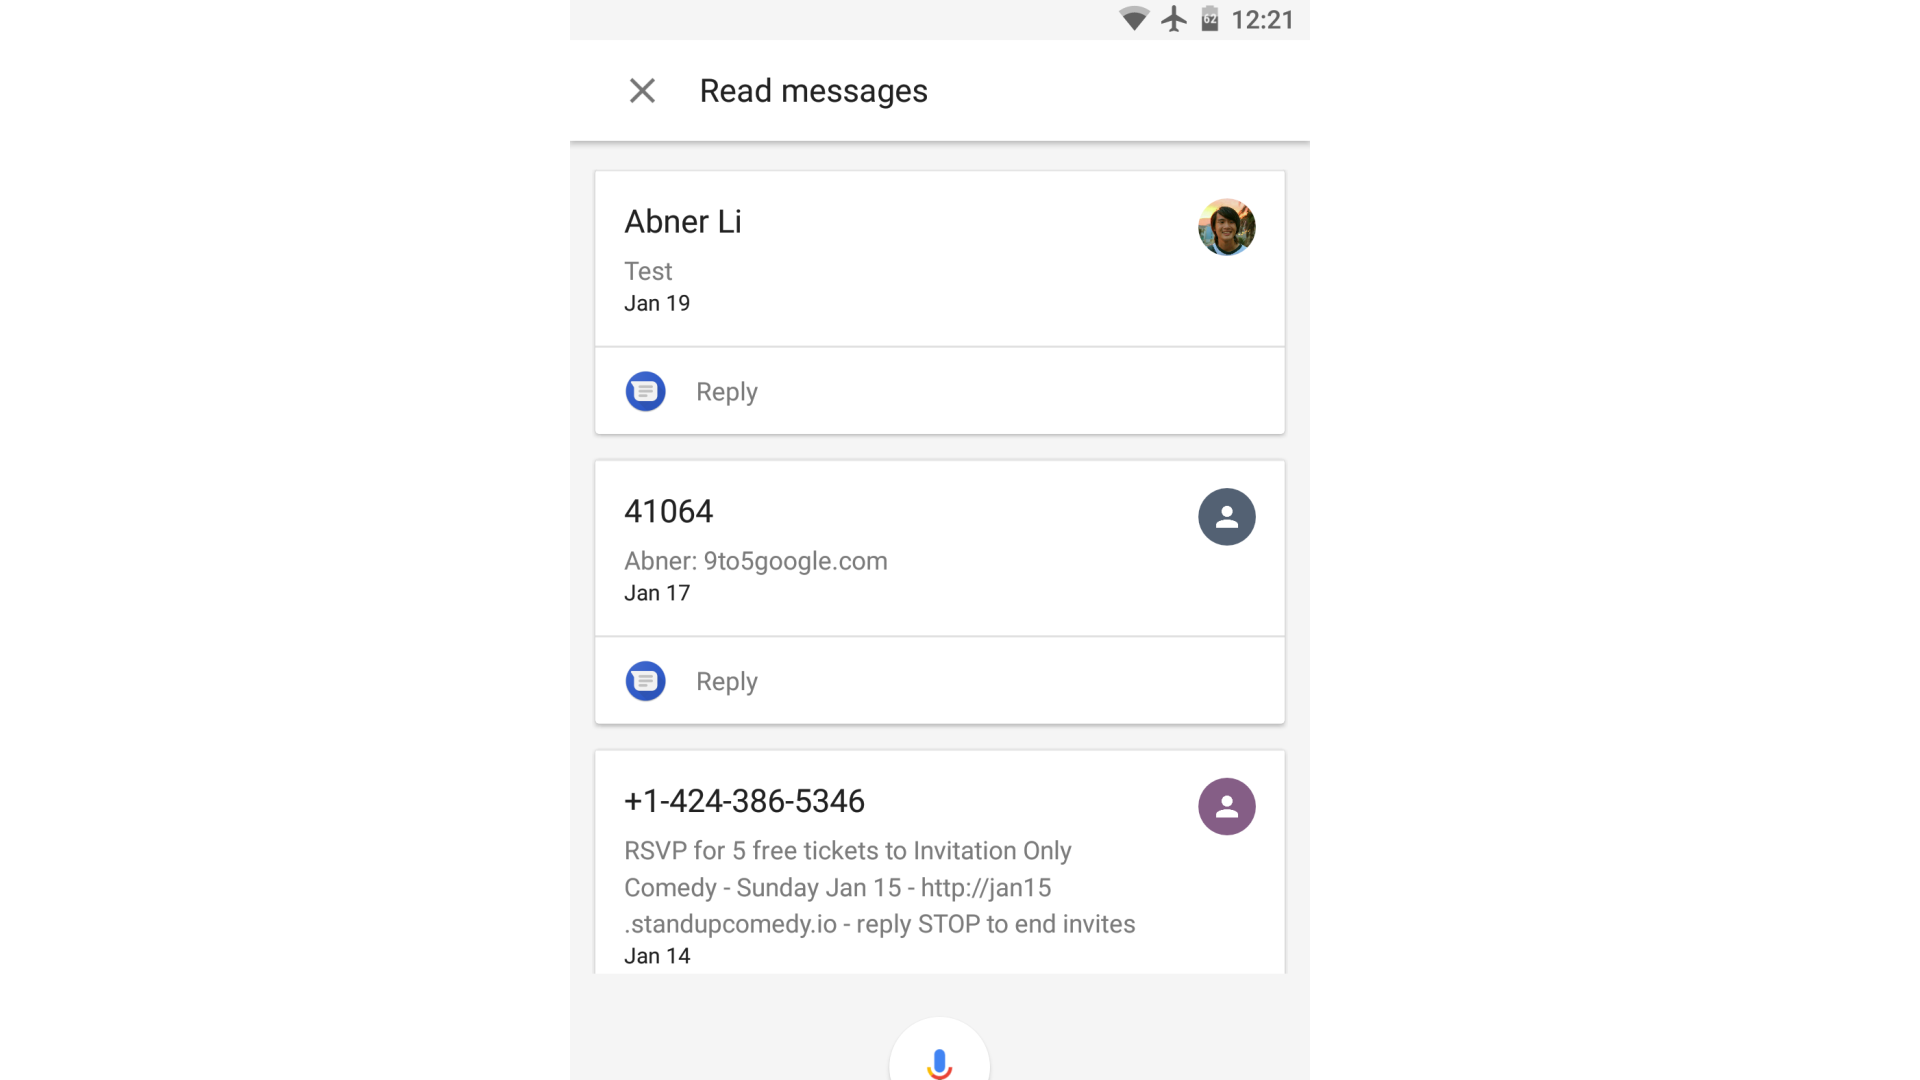 The Google Assistant can now help with reading and replying to text messages